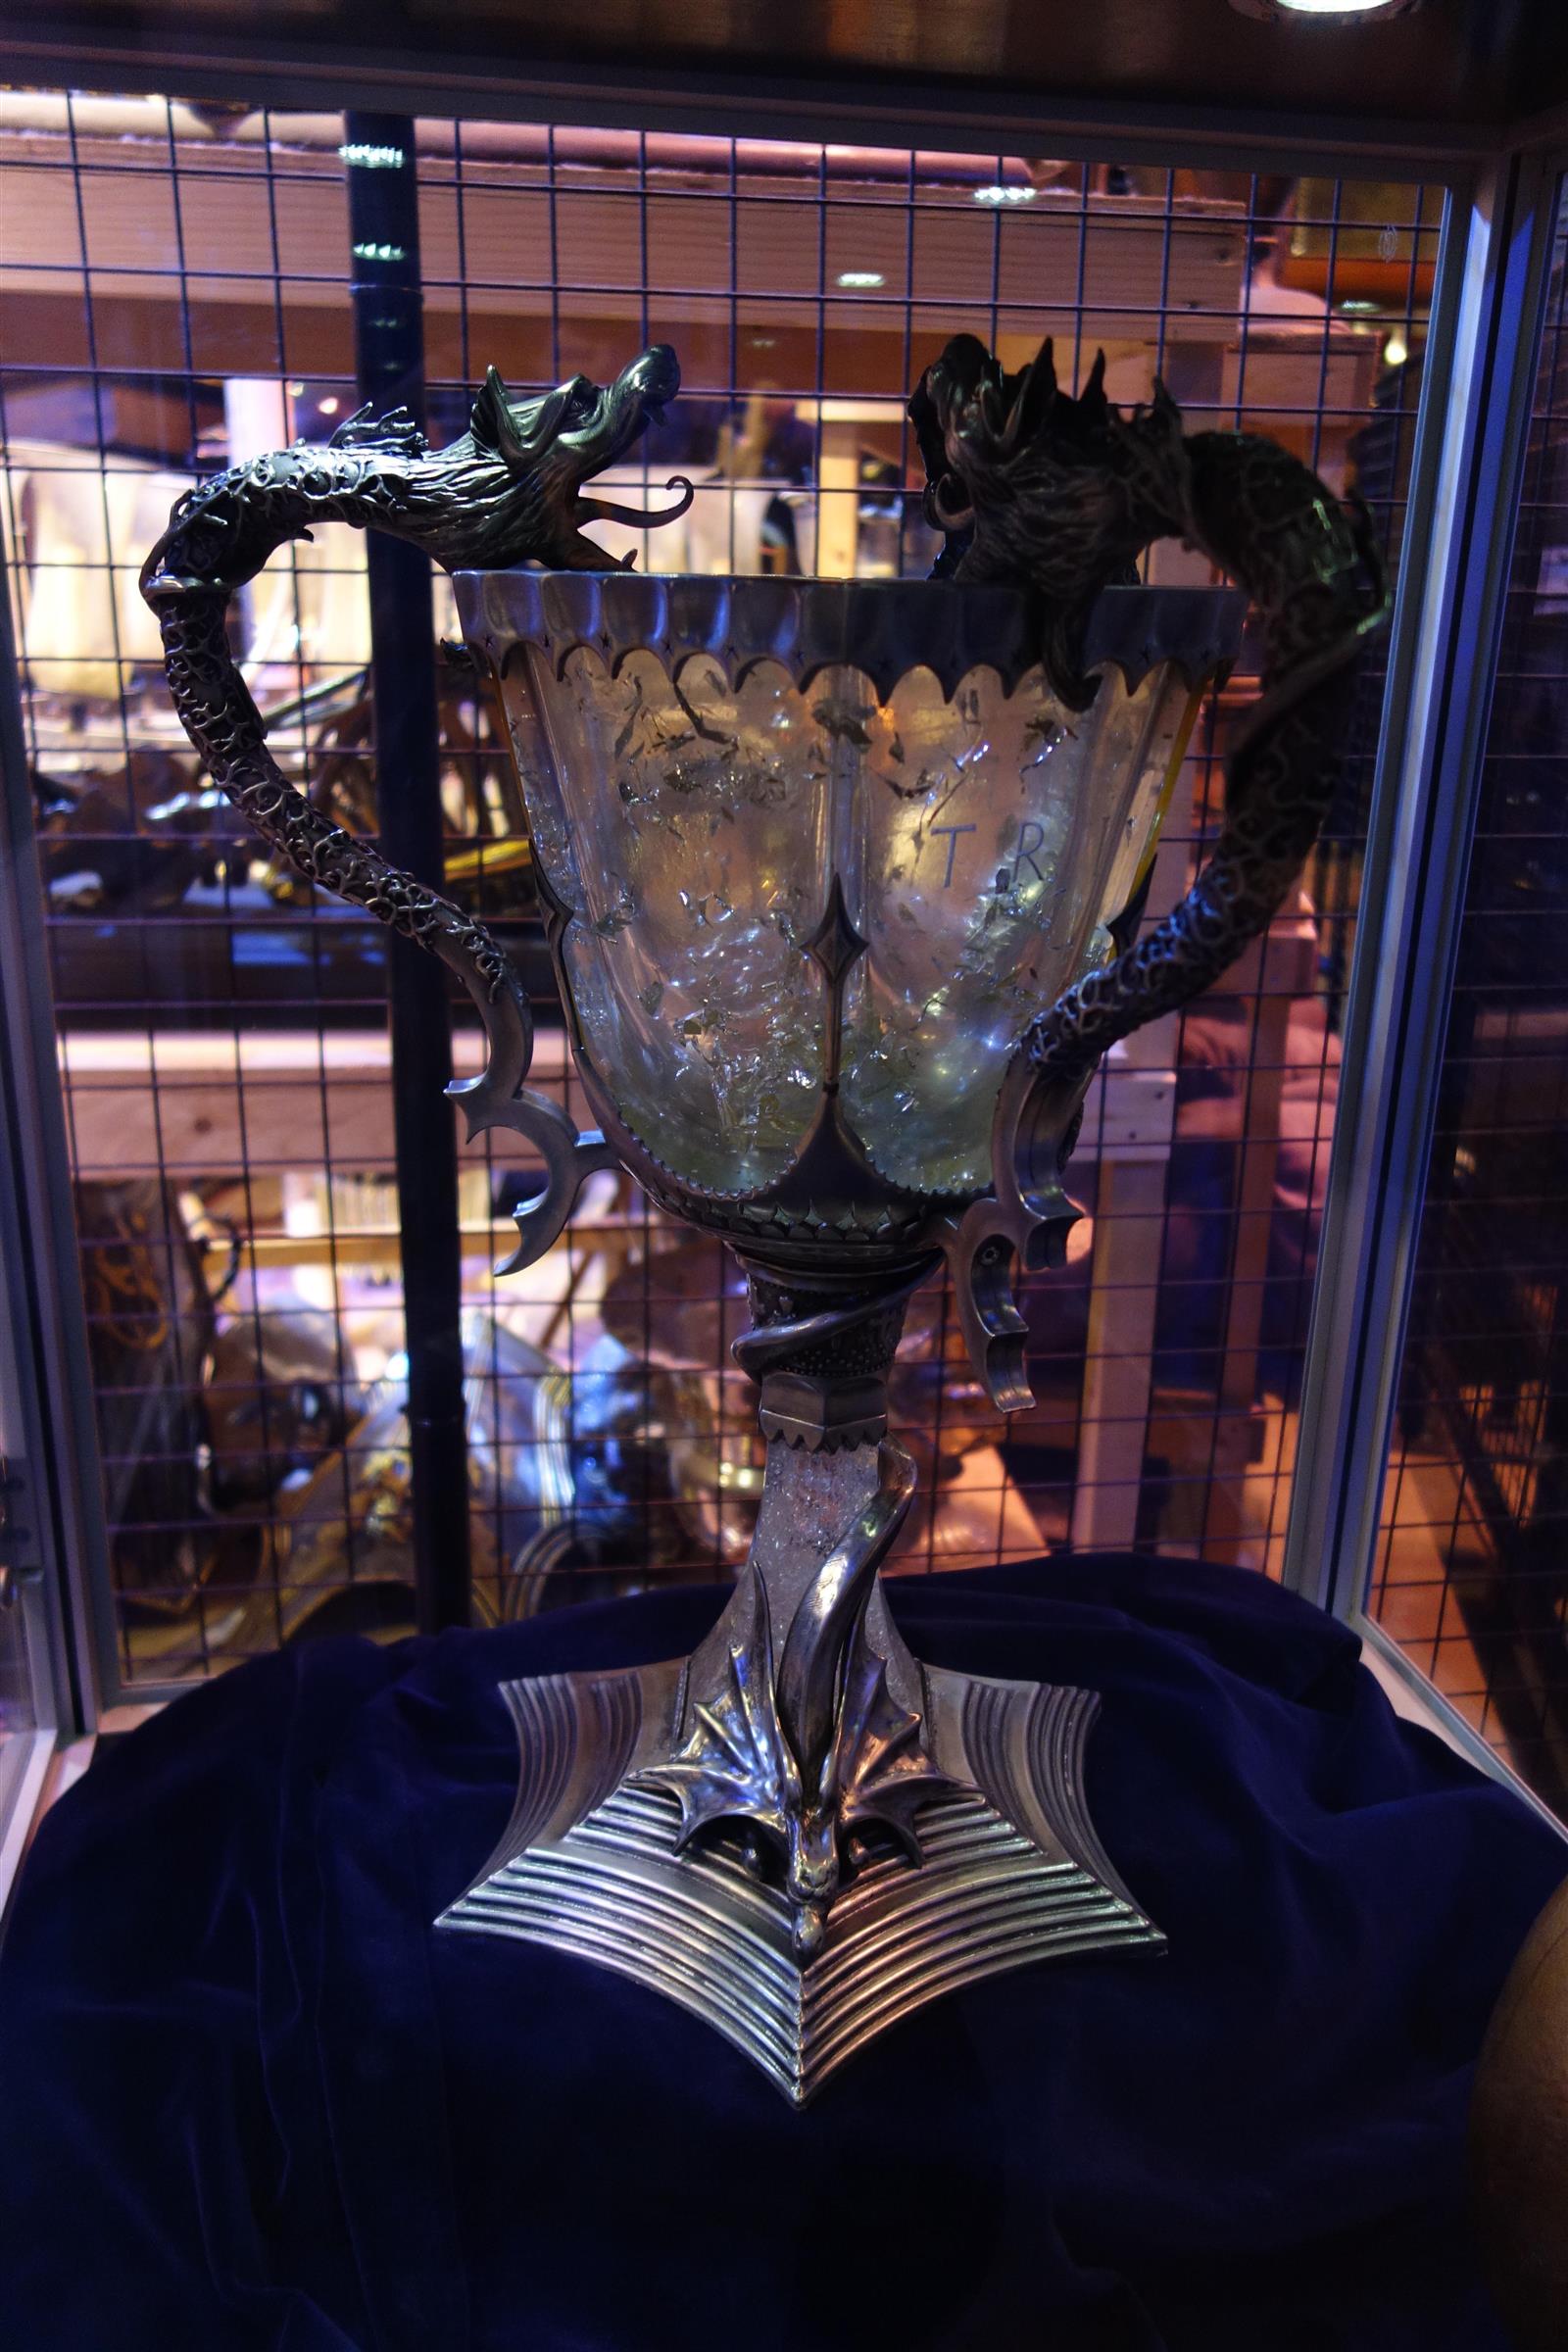 17. Triwizard Cup